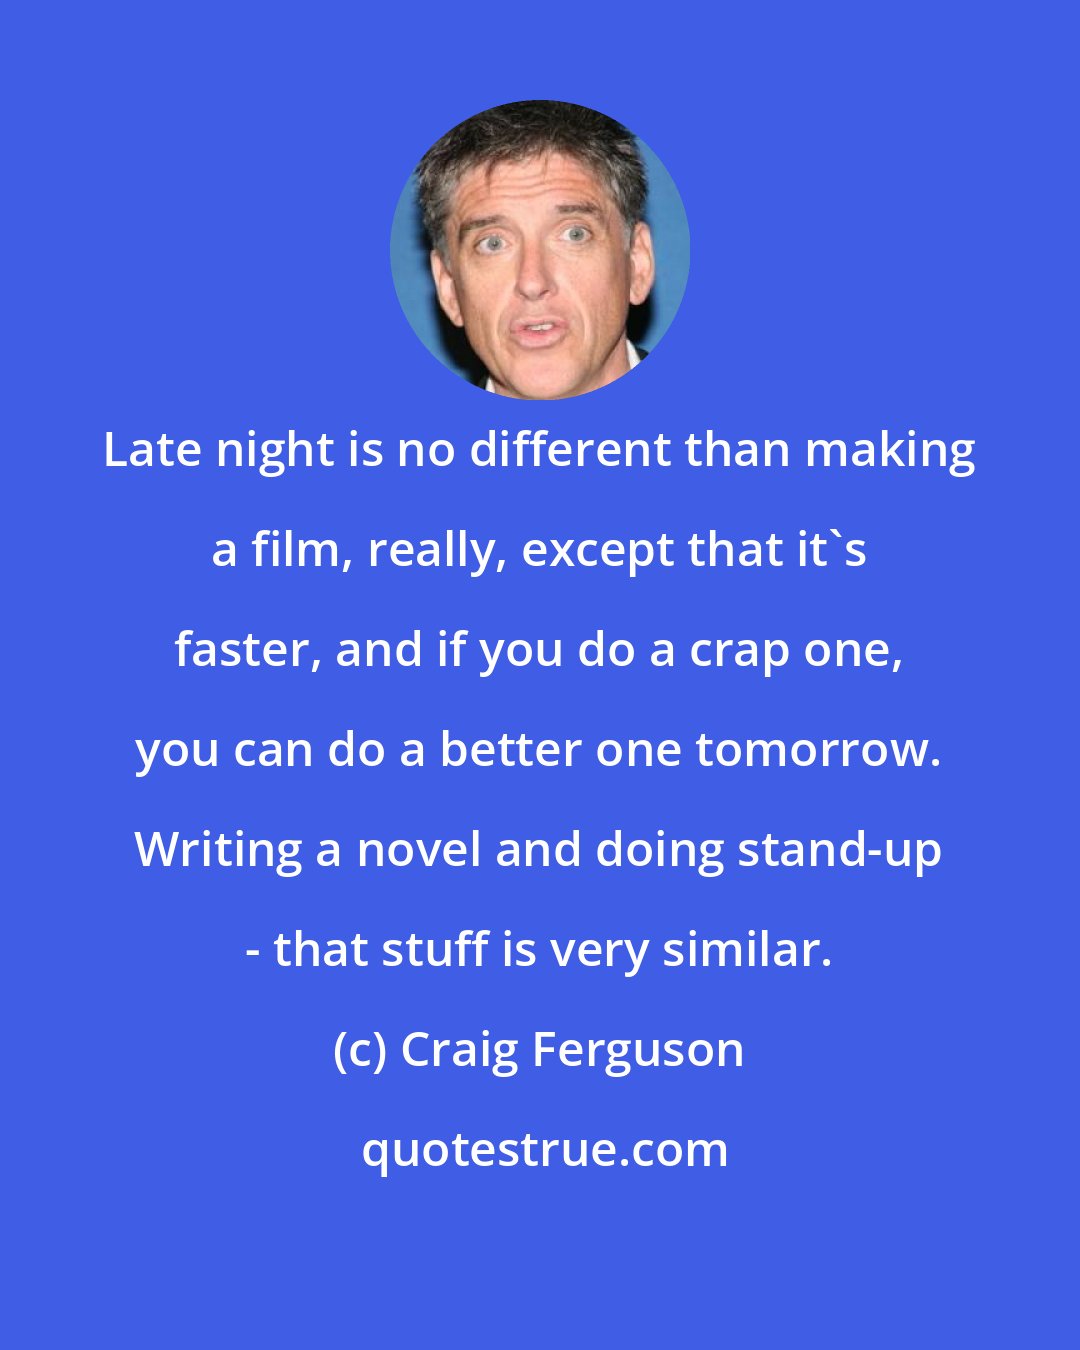 Craig Ferguson: Late night is no different than making a film, really, except that it's faster, and if you do a crap one, you can do a better one tomorrow. Writing a novel and doing stand-up - that stuff is very similar.